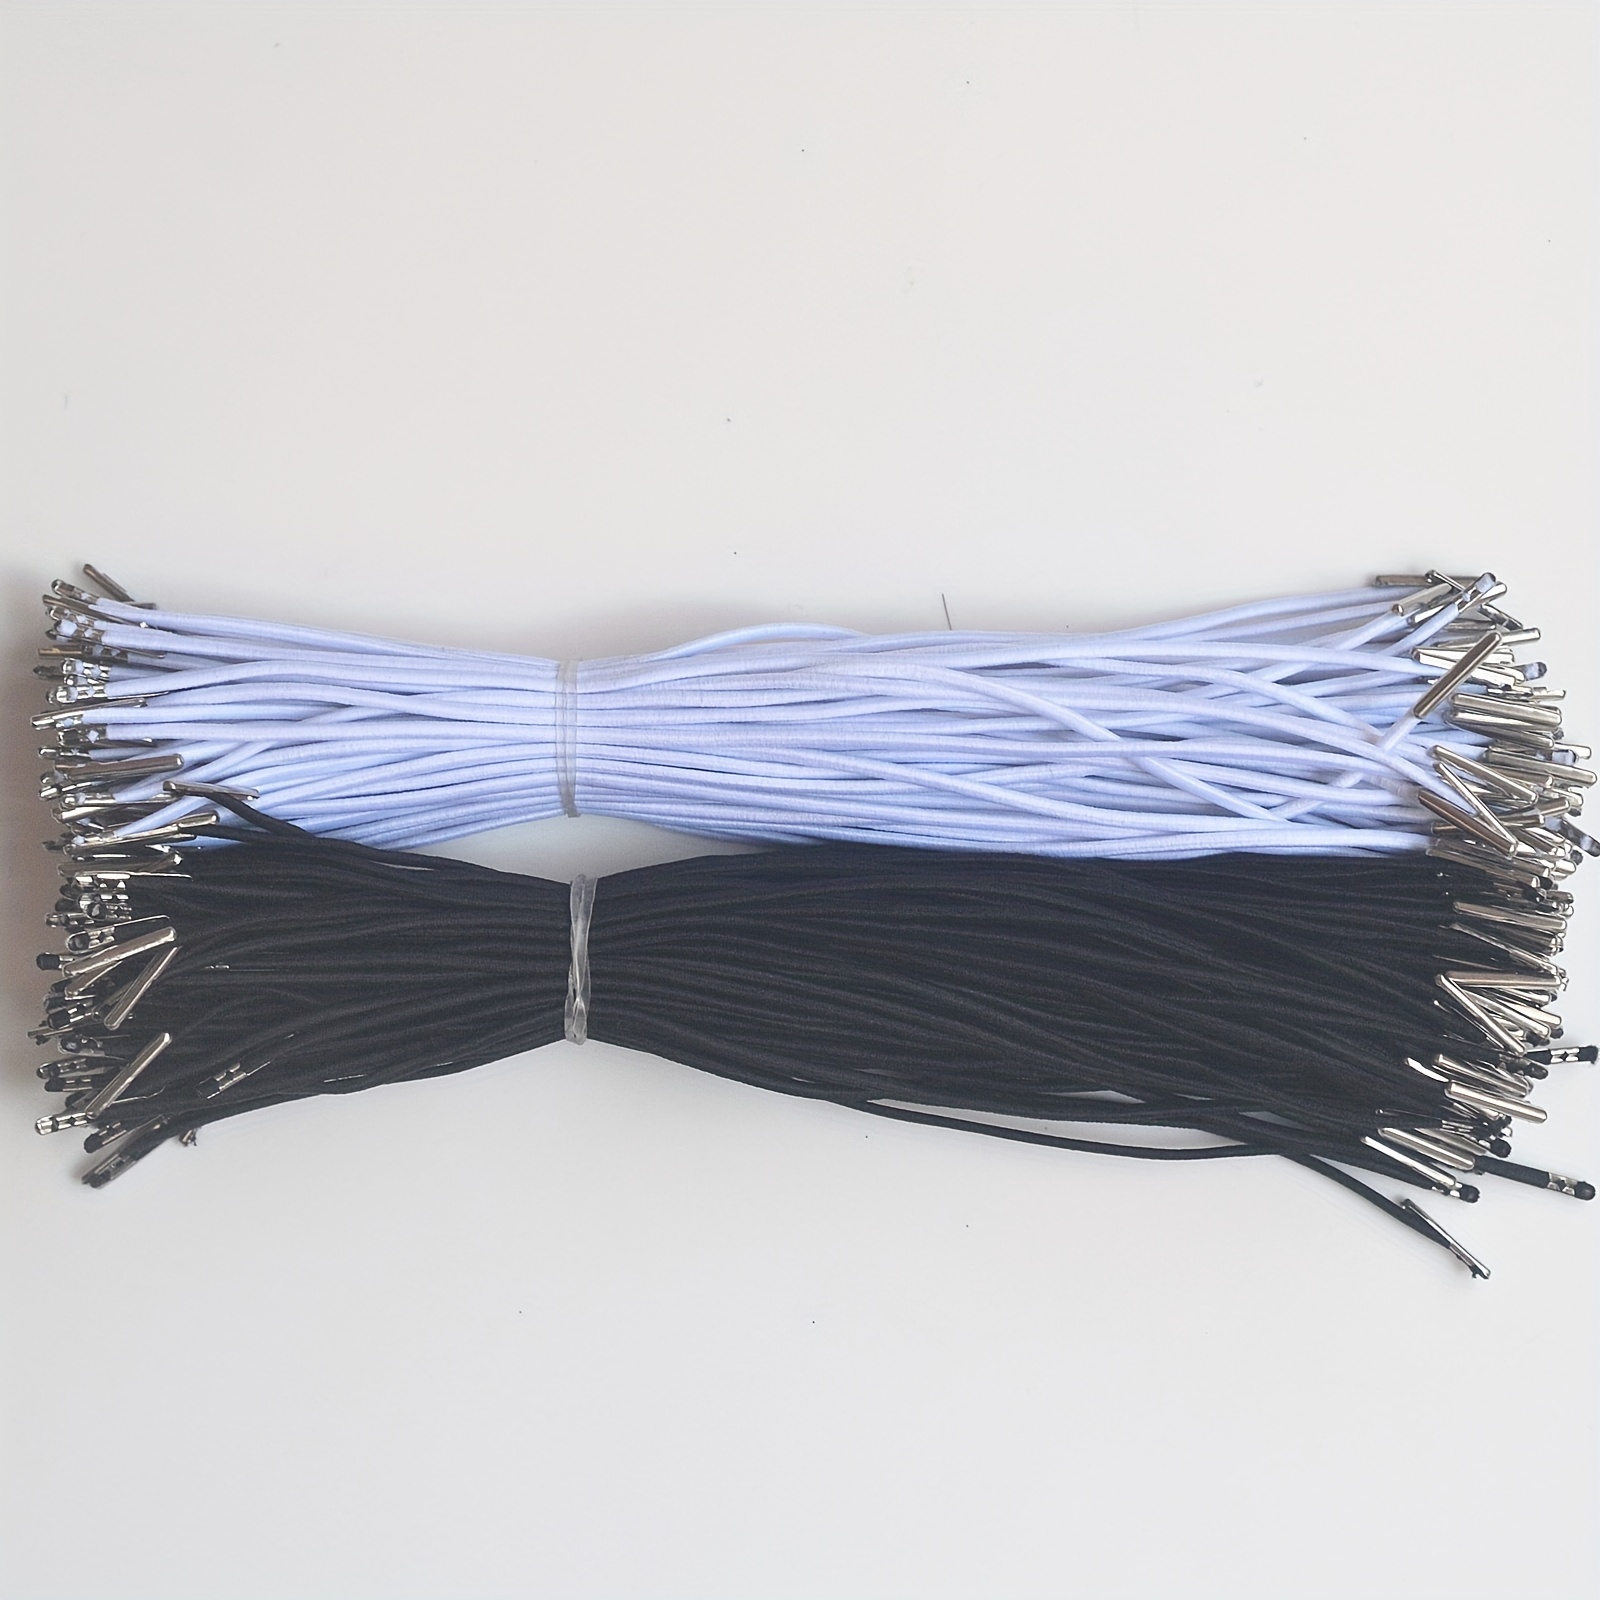 Round Elastic Cord, with Fibre Outside and Rubber Inside, for